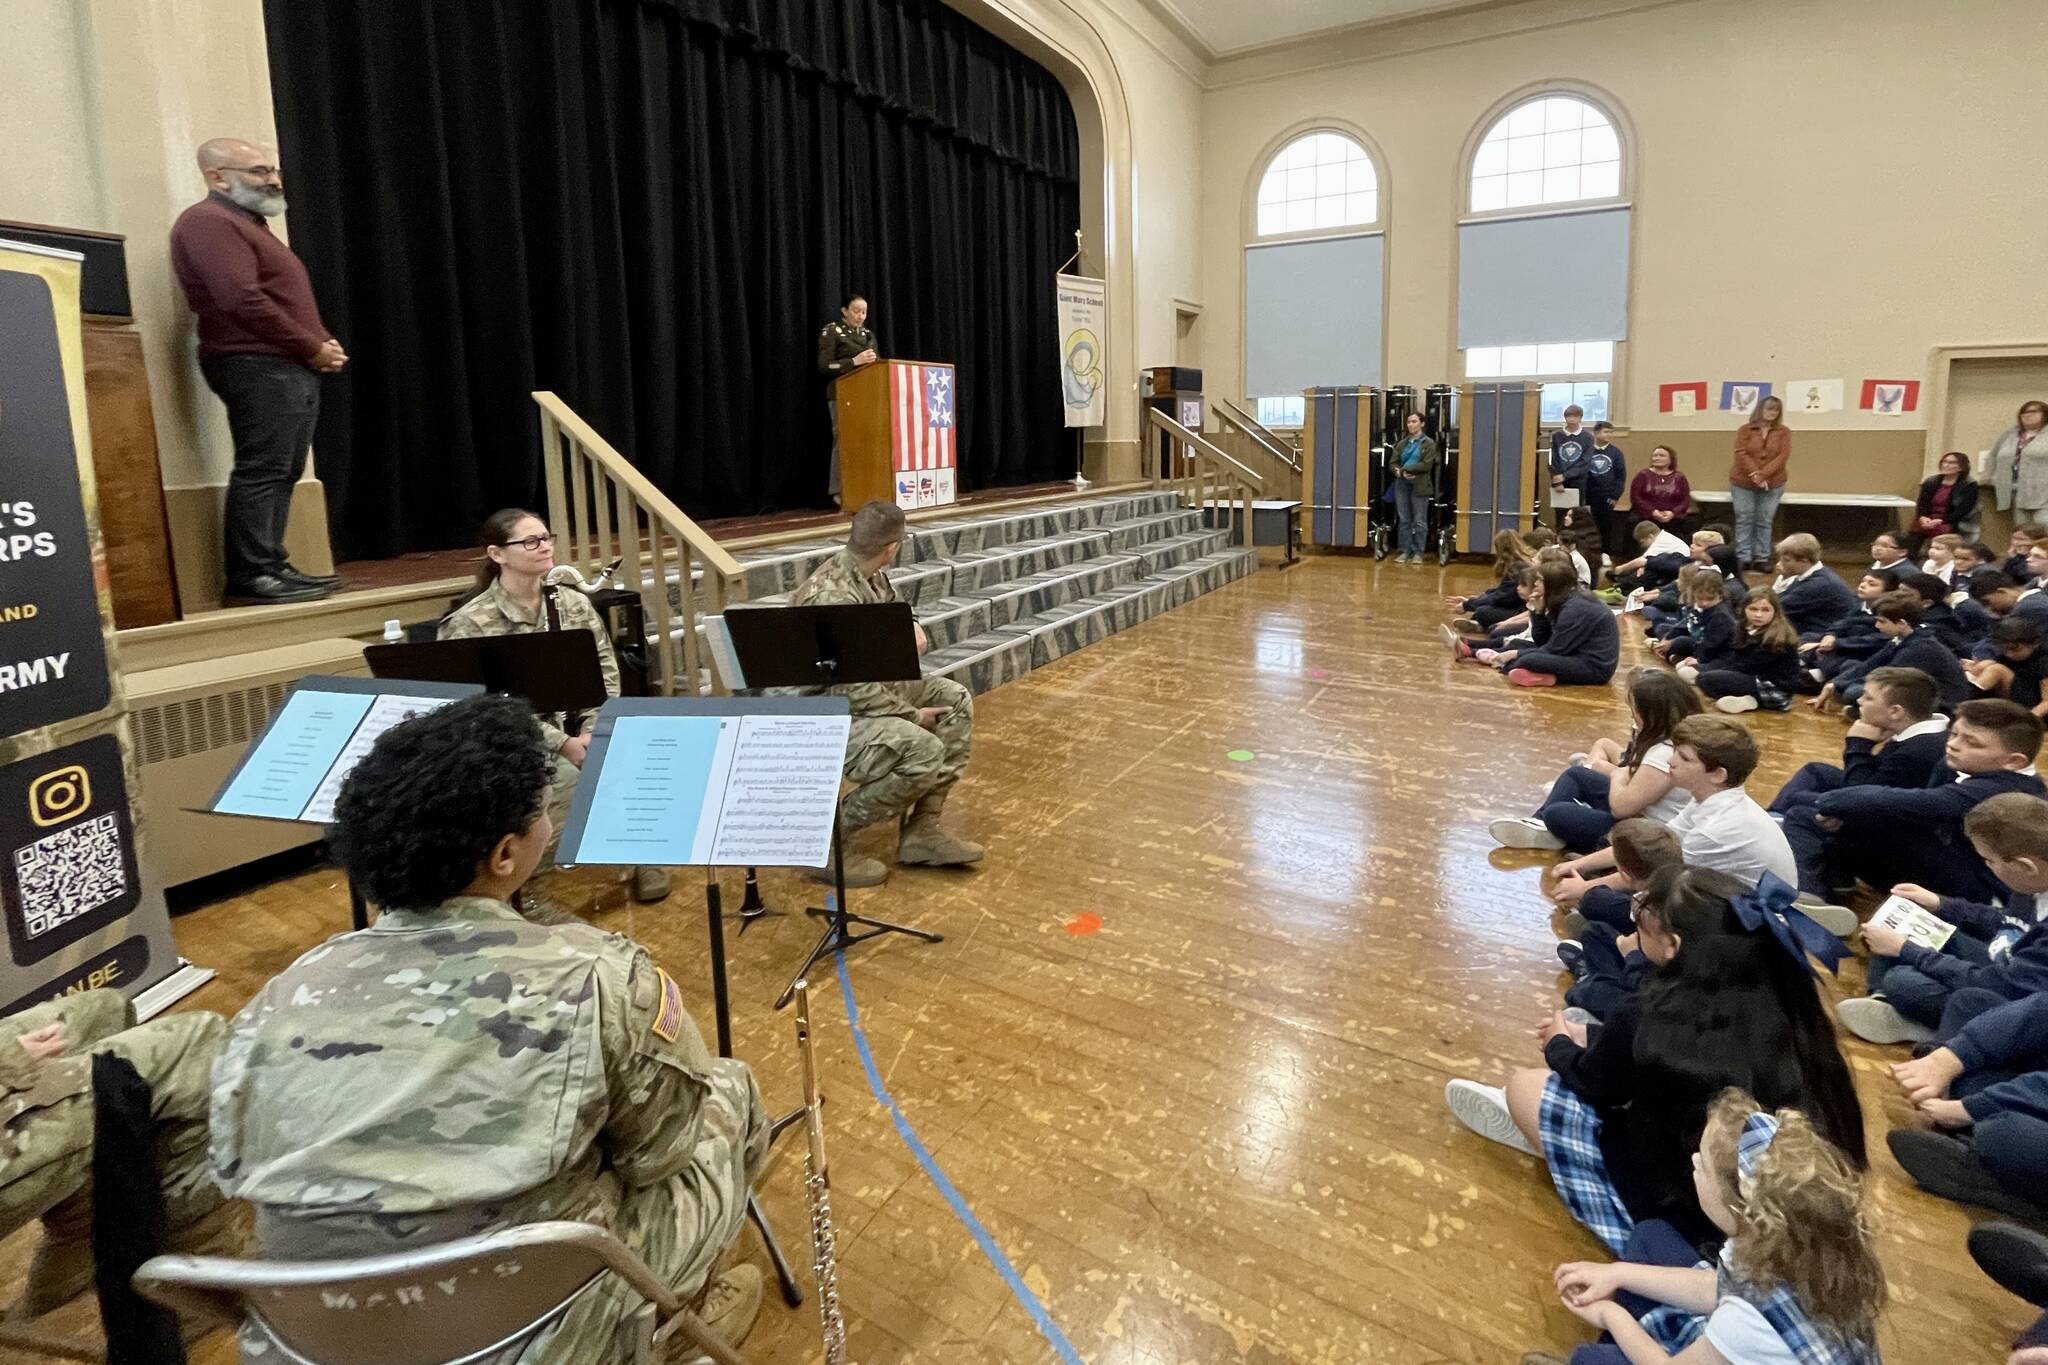 Students at St. Mary’s School gather for a Veterans Day assembly on Nov. 9. (Michael S. Lockett / The Daily World)